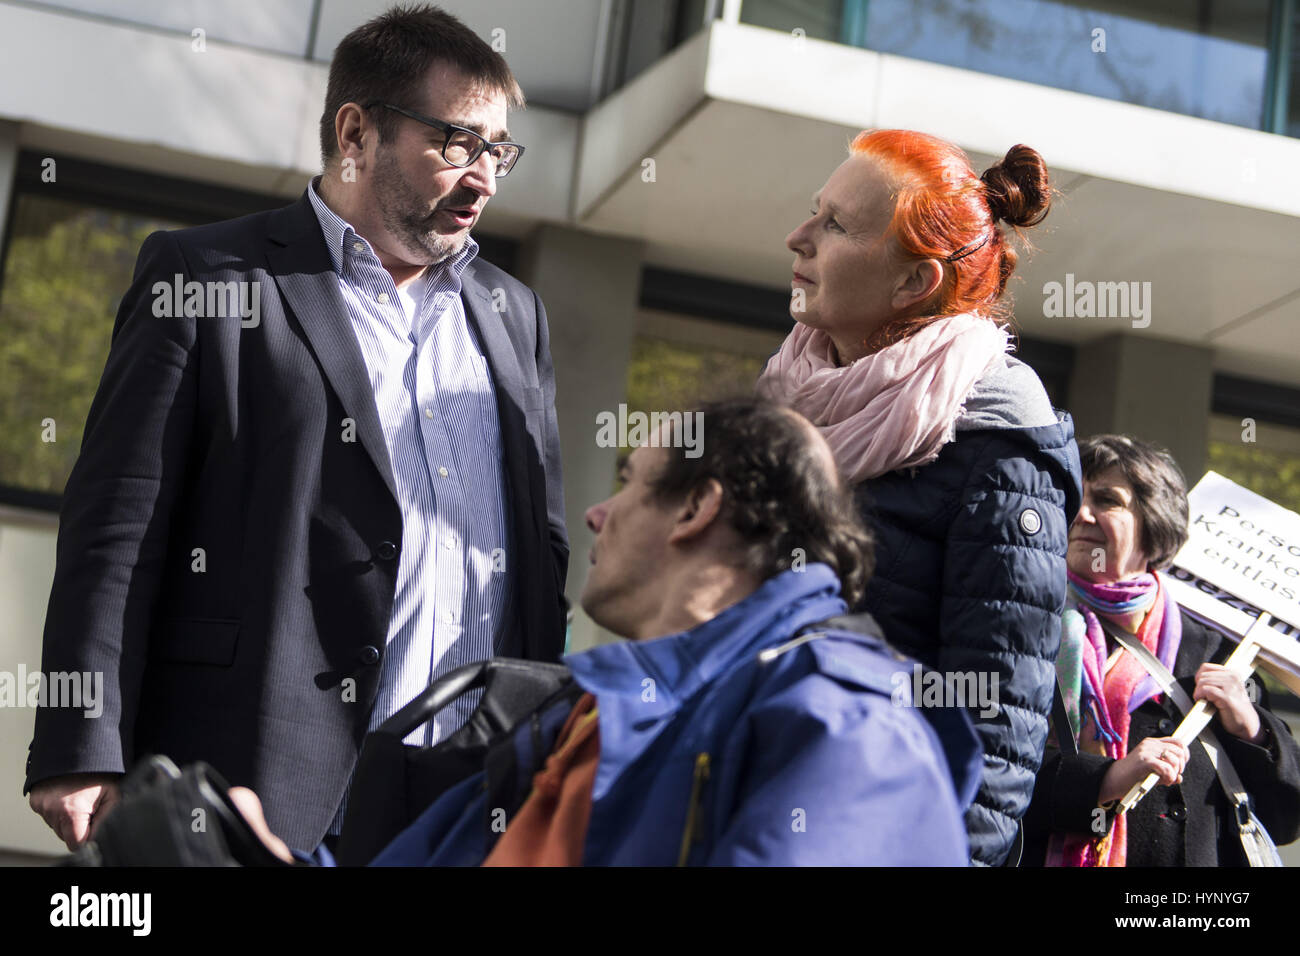 Berlin, Germany. 6th Apr, 2017. City councilor KNUT MILDNER-SPINDLER (Left Party) in conversation with disability rights activists and their assistants two days after about the occupation of the town hall in Friedrichshain-Kreuzberg. The demonstrators make the Berlin district of Friedrichshain-Kreuzberg responsible for the currently very tense economic situation of the assistance service 'ambulante dienste' because of unpaid bills for services already provided support services in hospitals. Credit: ZUMA Press, Inc./Alamy Live News Stock Photo